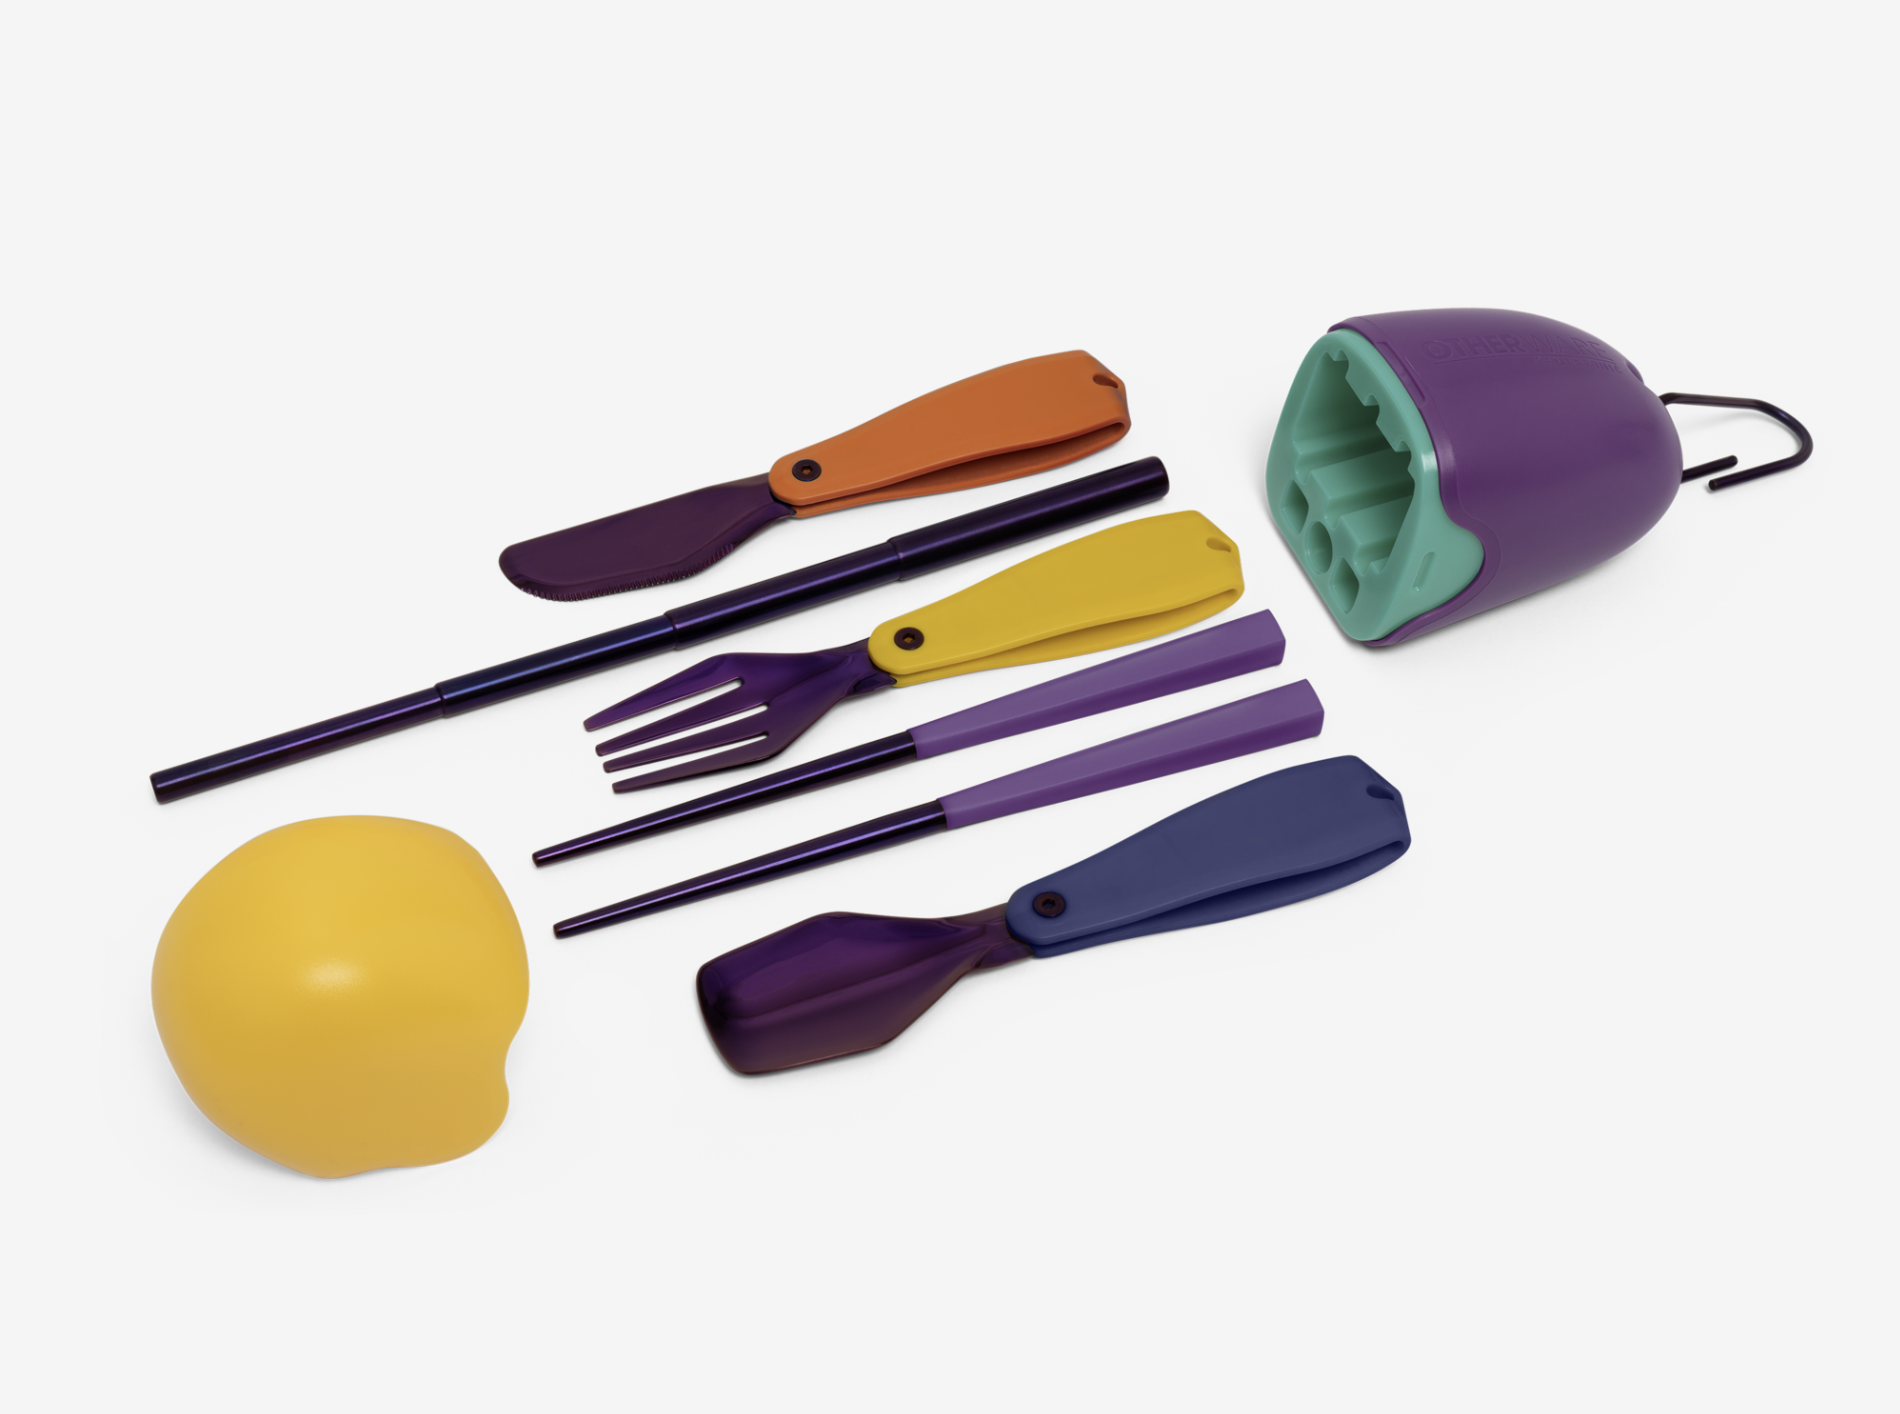 Pricey at 49 euros, but long lasting, the Pebble cutlery set from circular economy brand Pentatonic